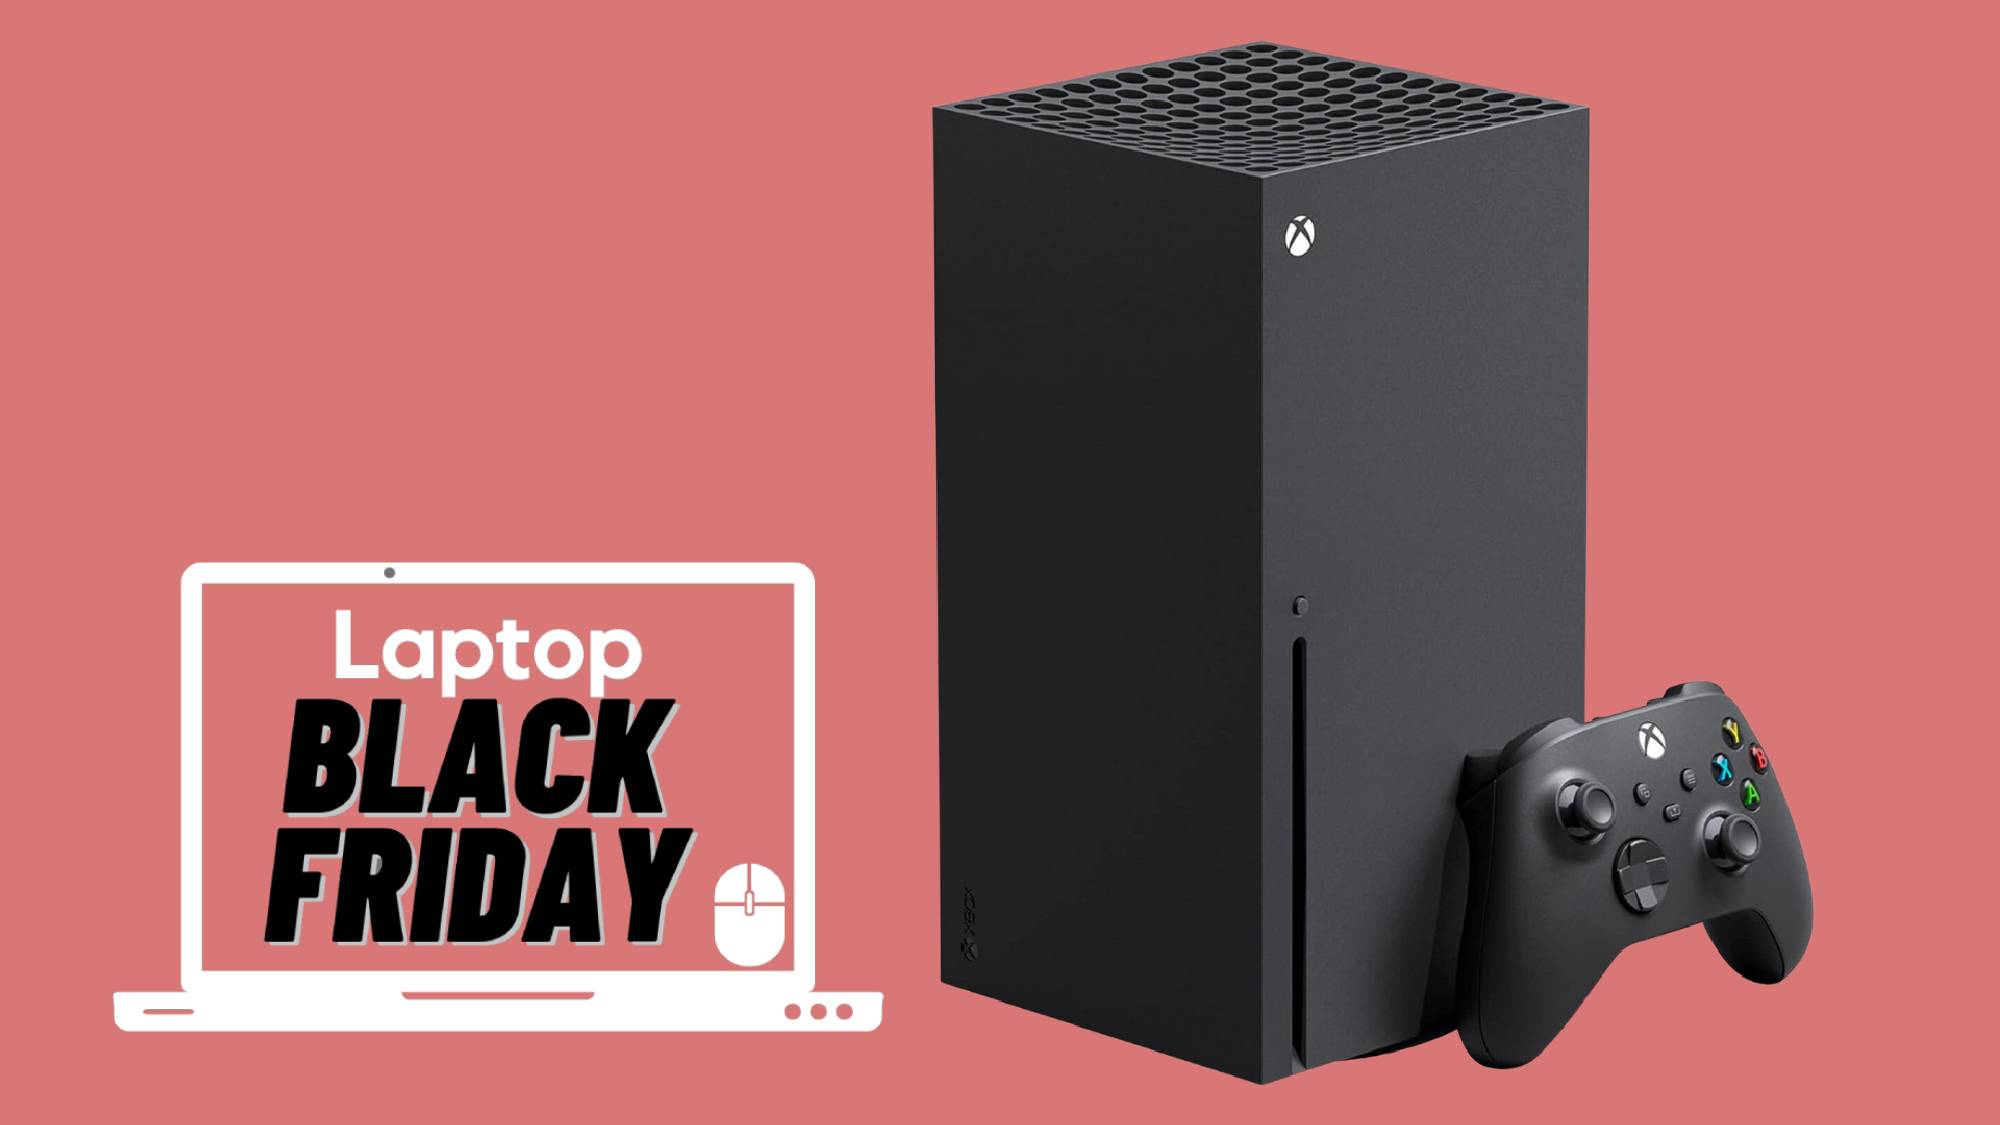 Xbox Series X discount rumored to bring $130 saving for Black Friday